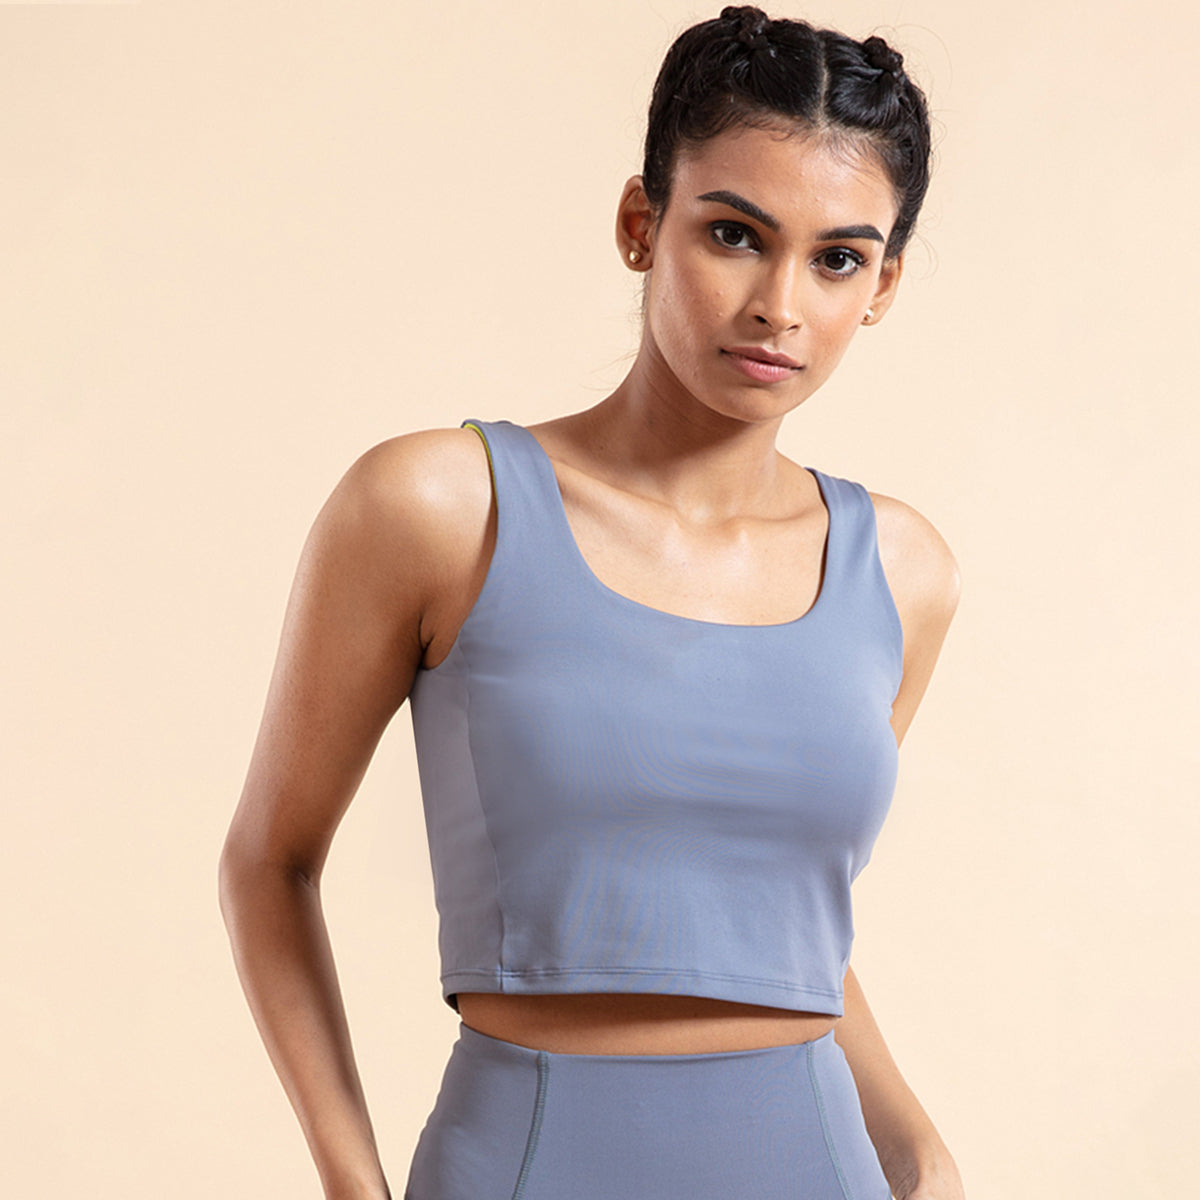 Nykd All Day Crop top Bra- NYK206 China Blue